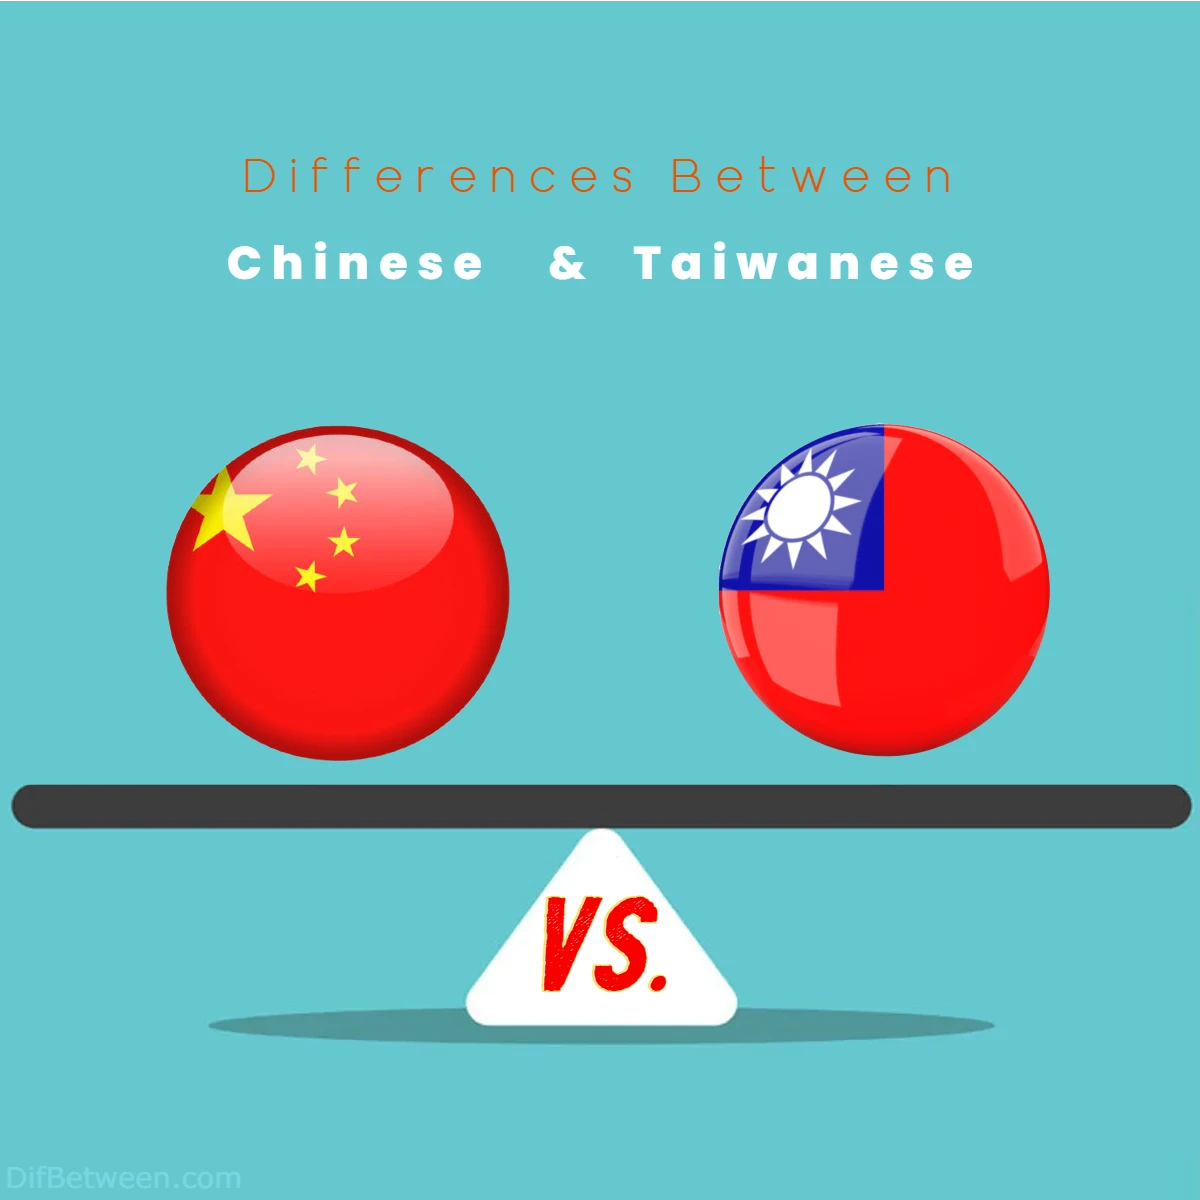 Differences Between Chinese vs Taiwanese